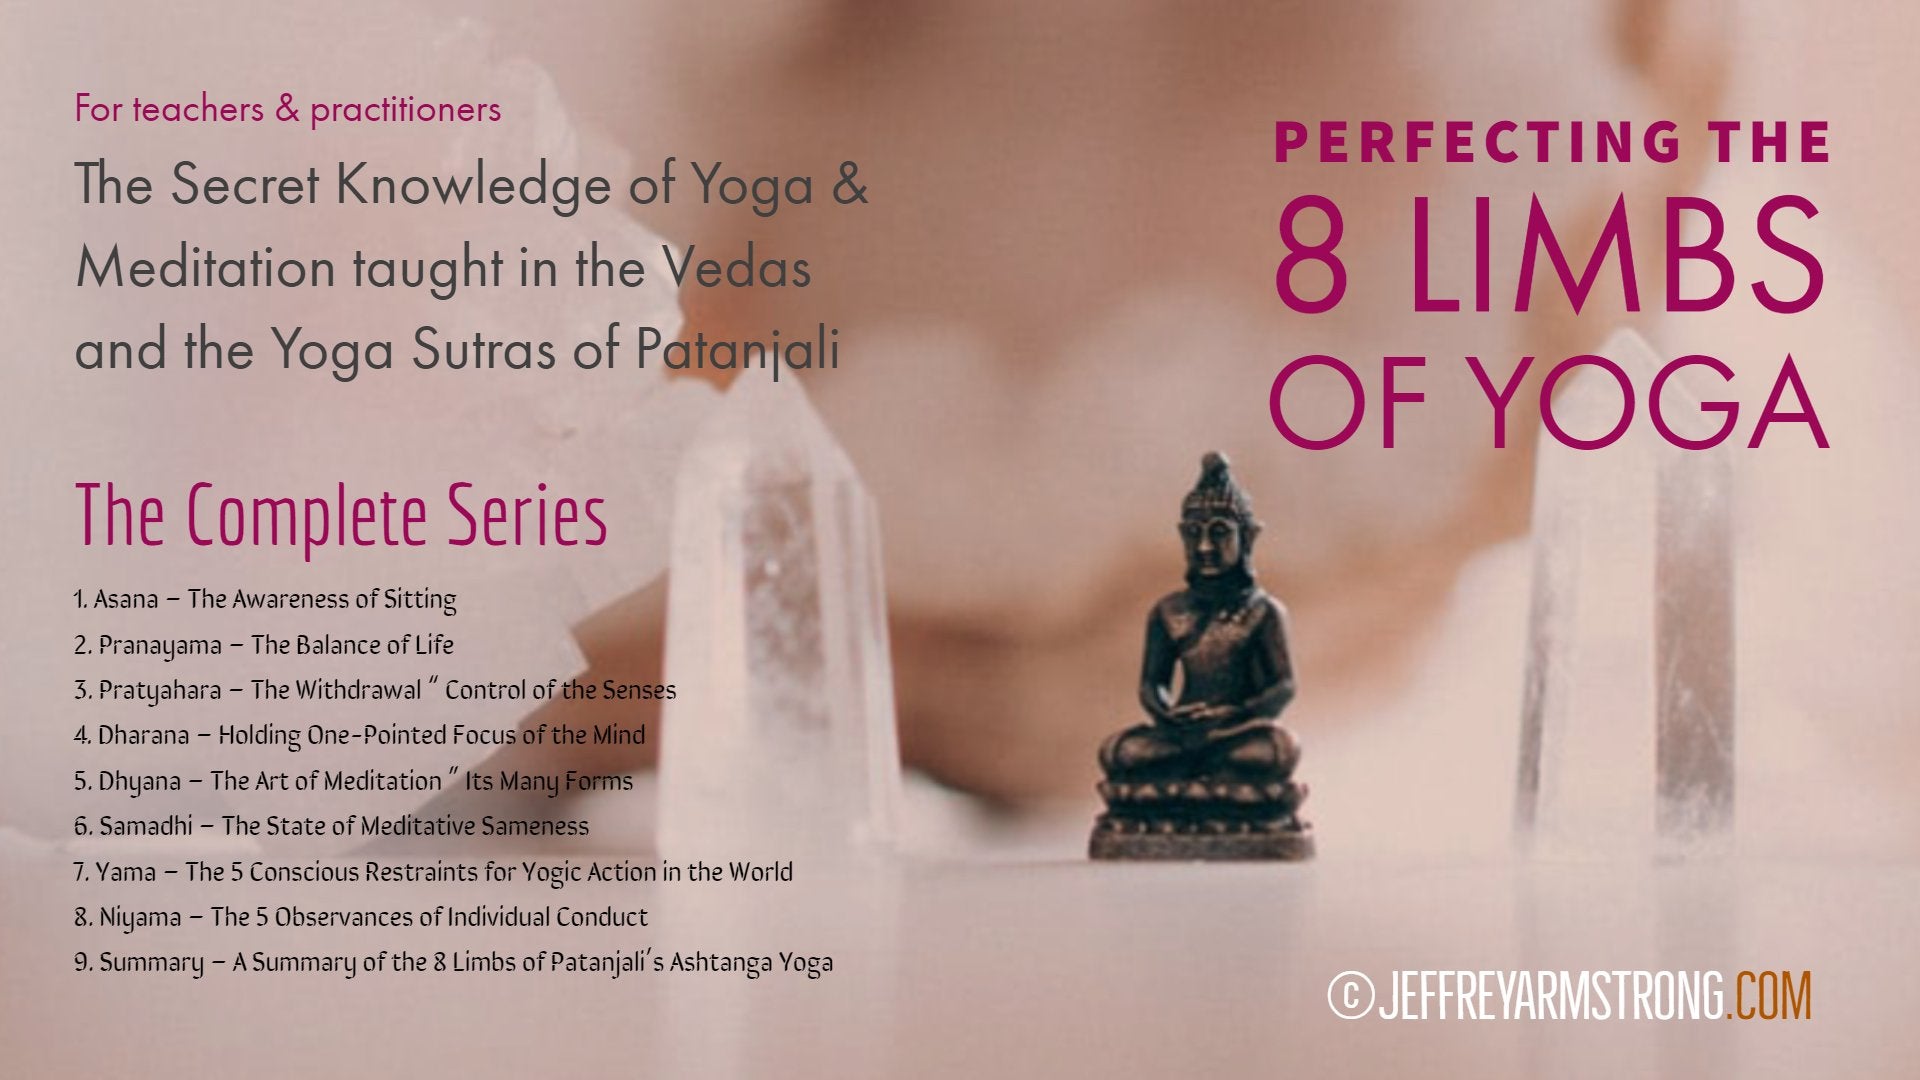 Perfecting The 8 Limbs of Yoga (9 Lessons)